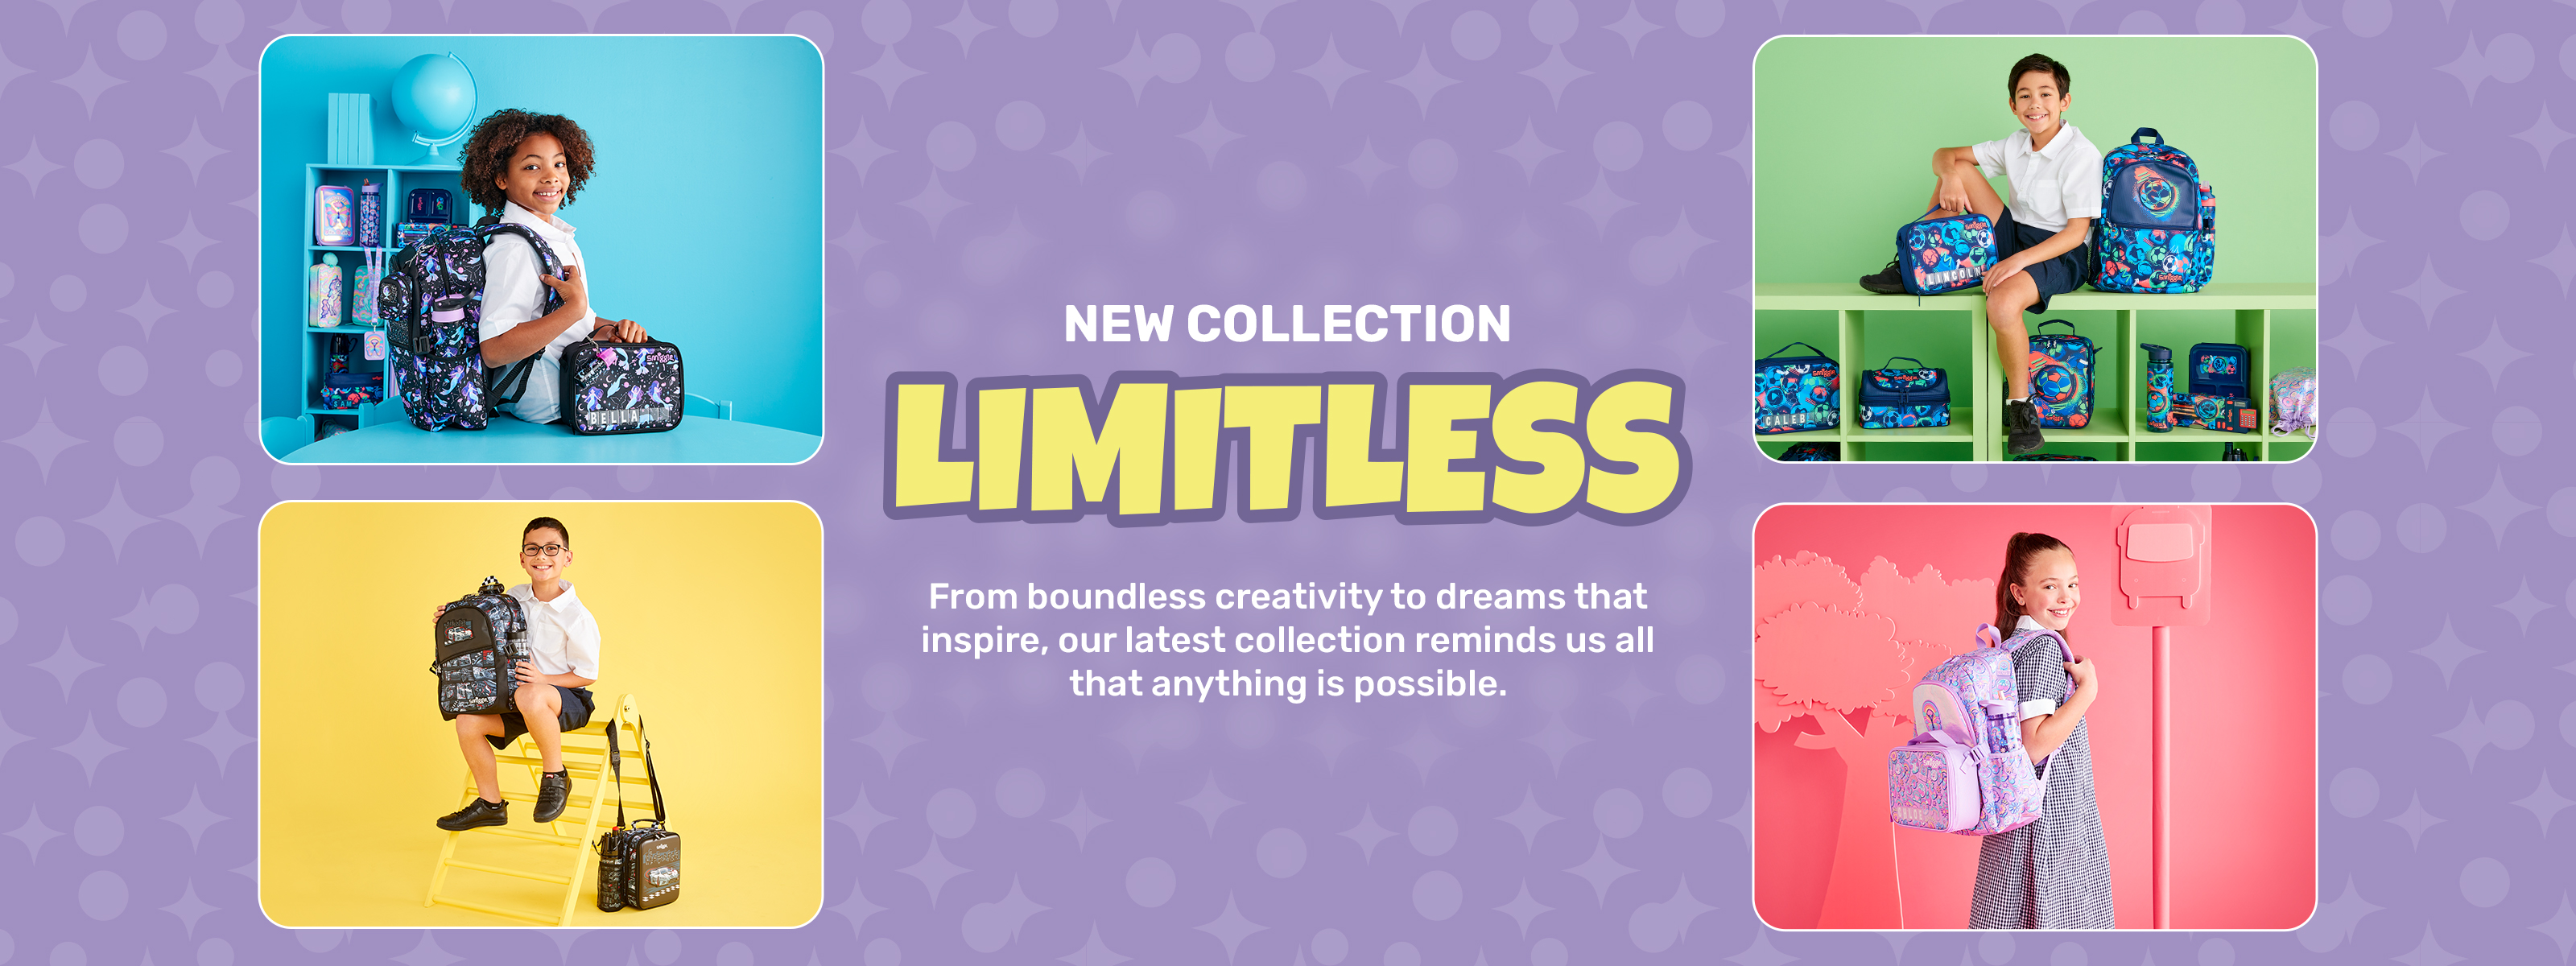 New Collection Limitless